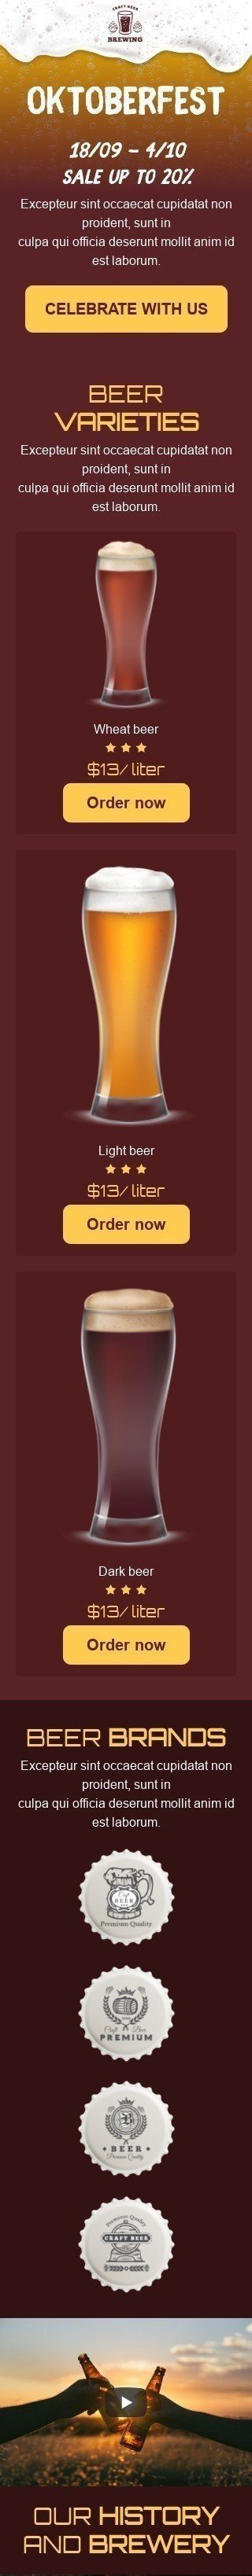 Oktoberfest Email Template «Craft beer» for Beverages industry mobile view